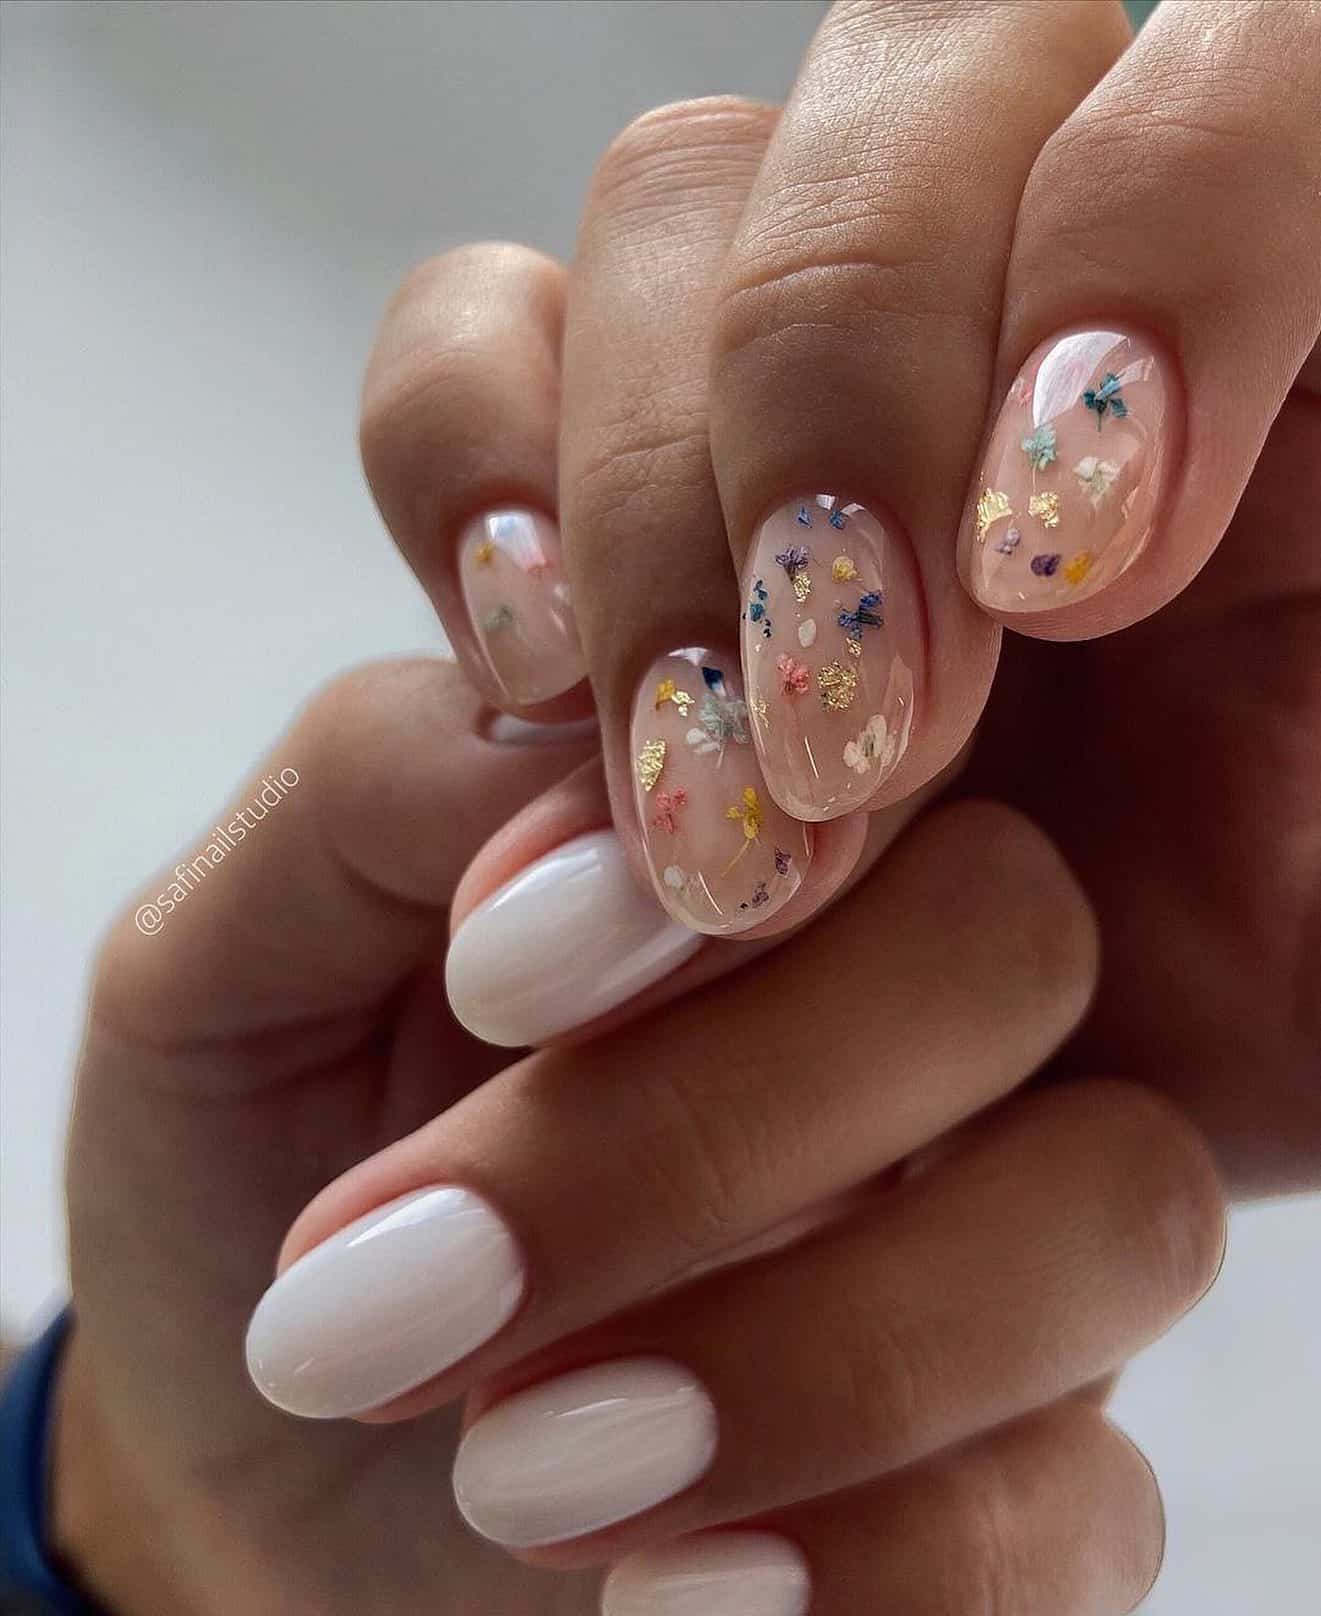 Nail your wedding season look with our press on nails! 💅💍 Whether you're  the bride, bridesmaid, or guest, these fabulous nails will... | Instagram